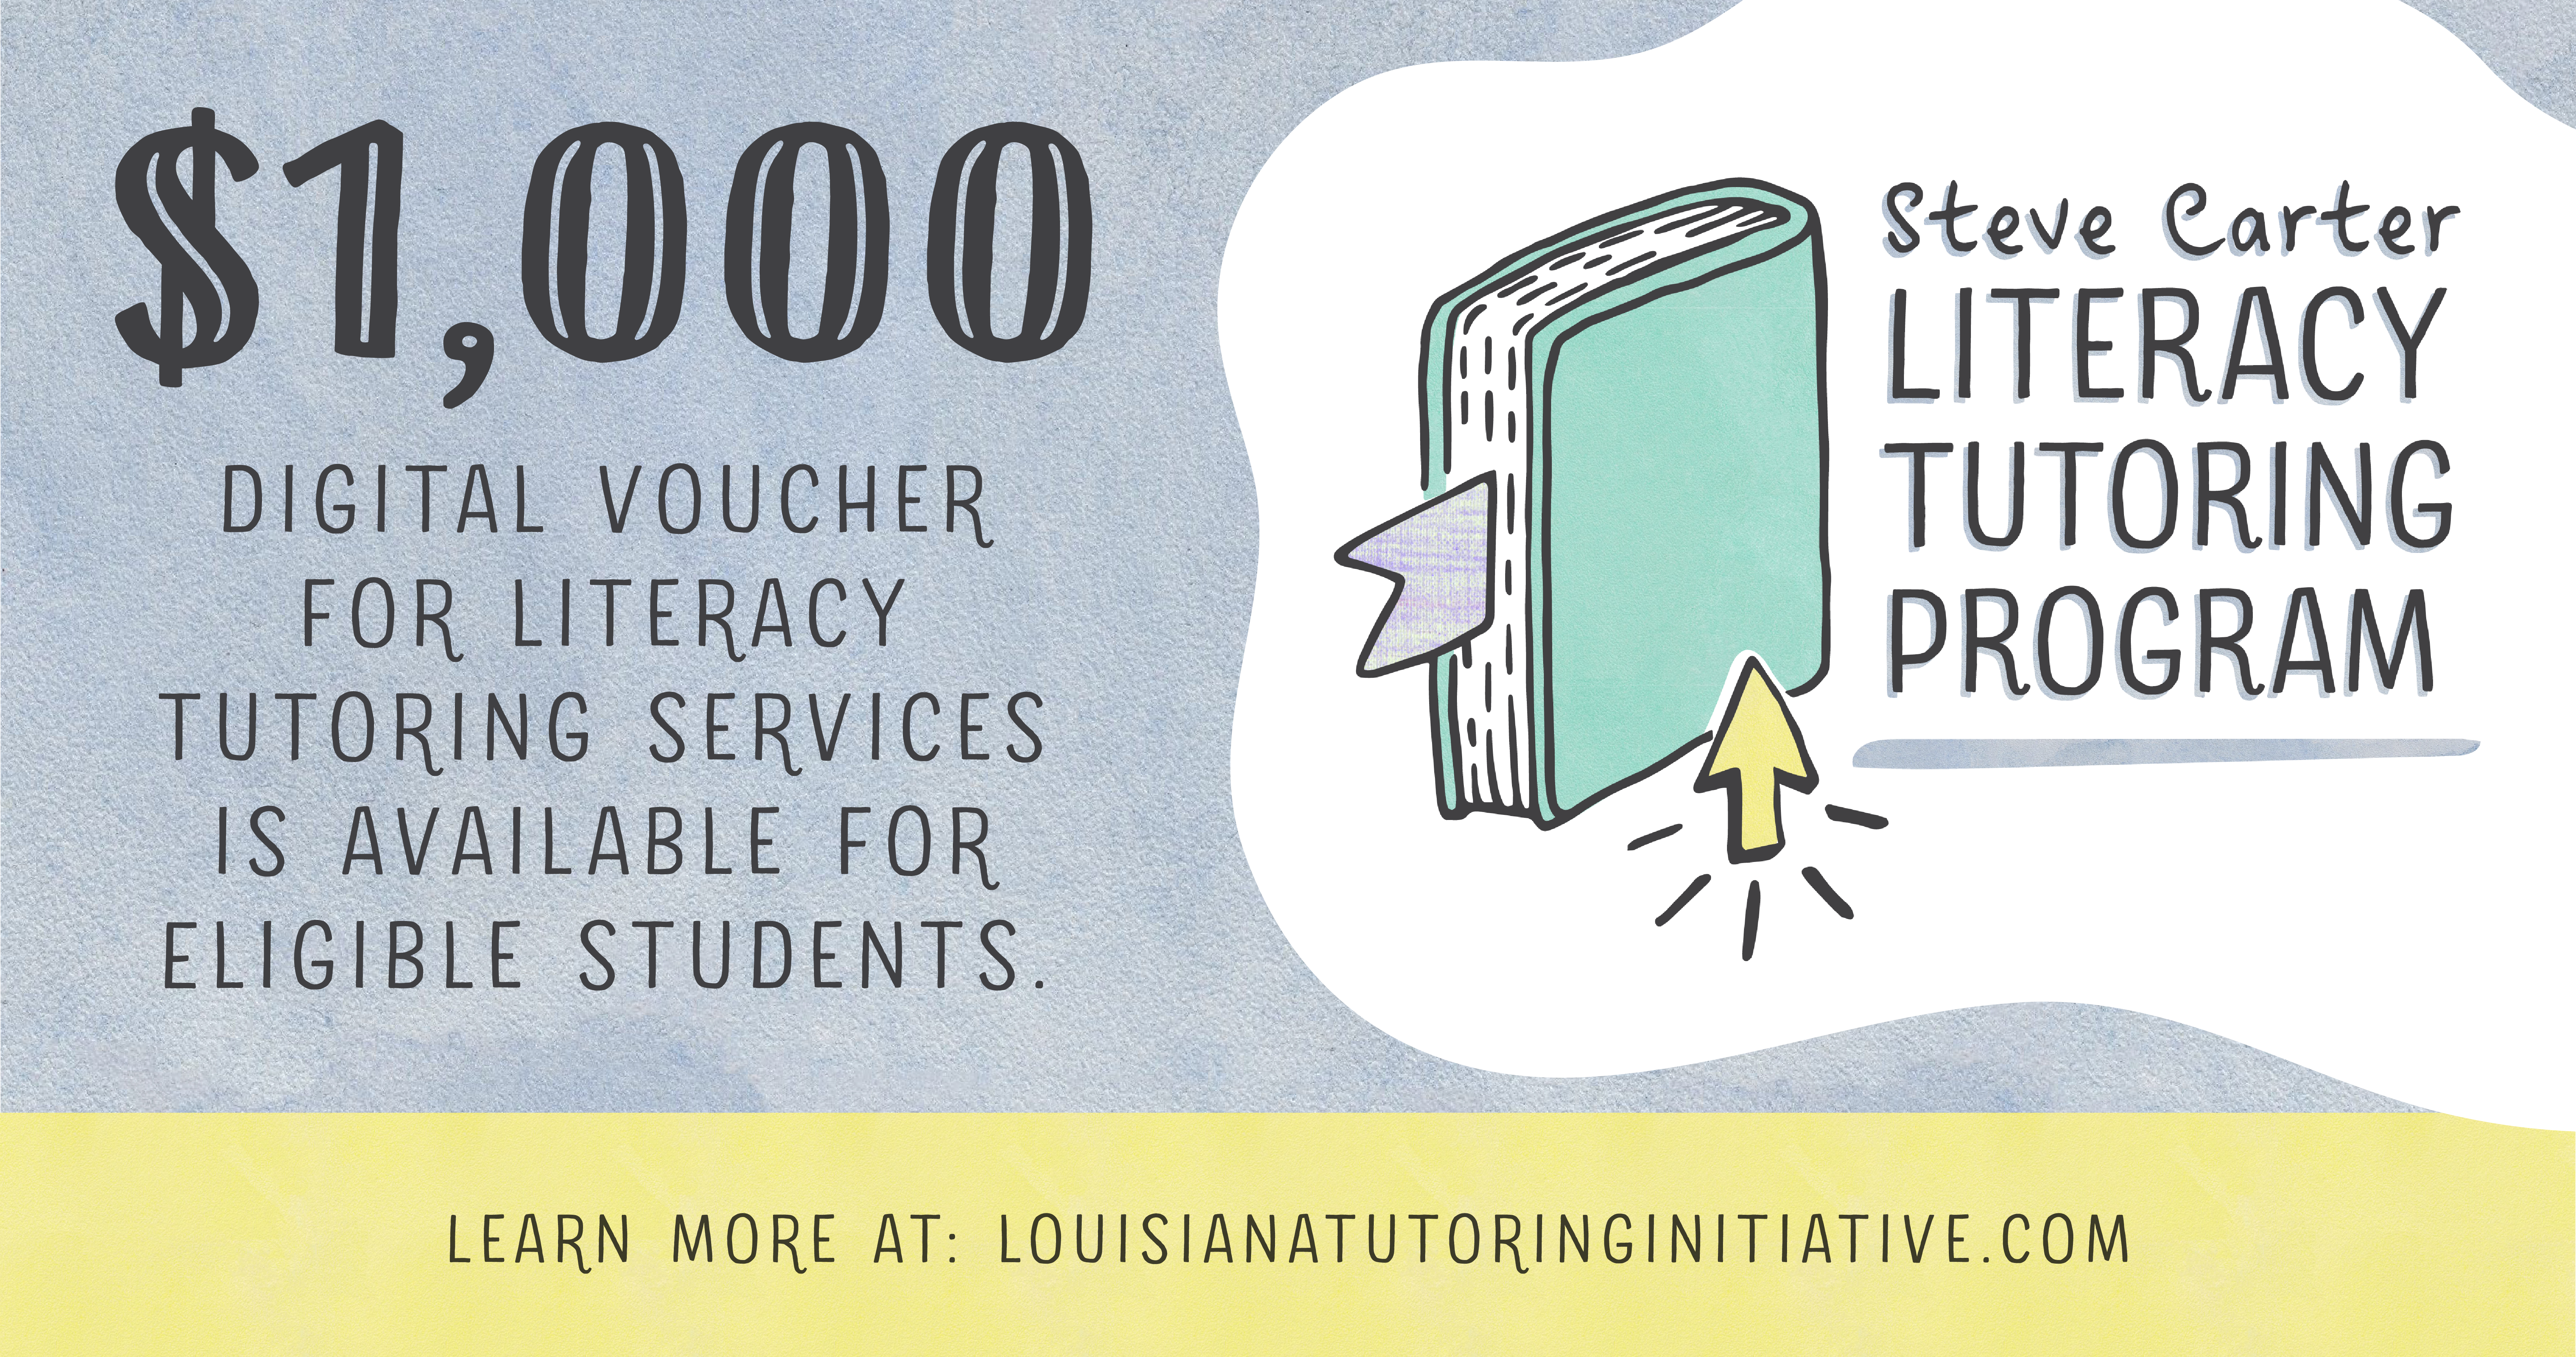 Steve Carter Literacy Tutoring Program - $1,000 digital voucher for literacy tutoring services is available for eligible students. Learn more at: louisianatutoringinitiative.com